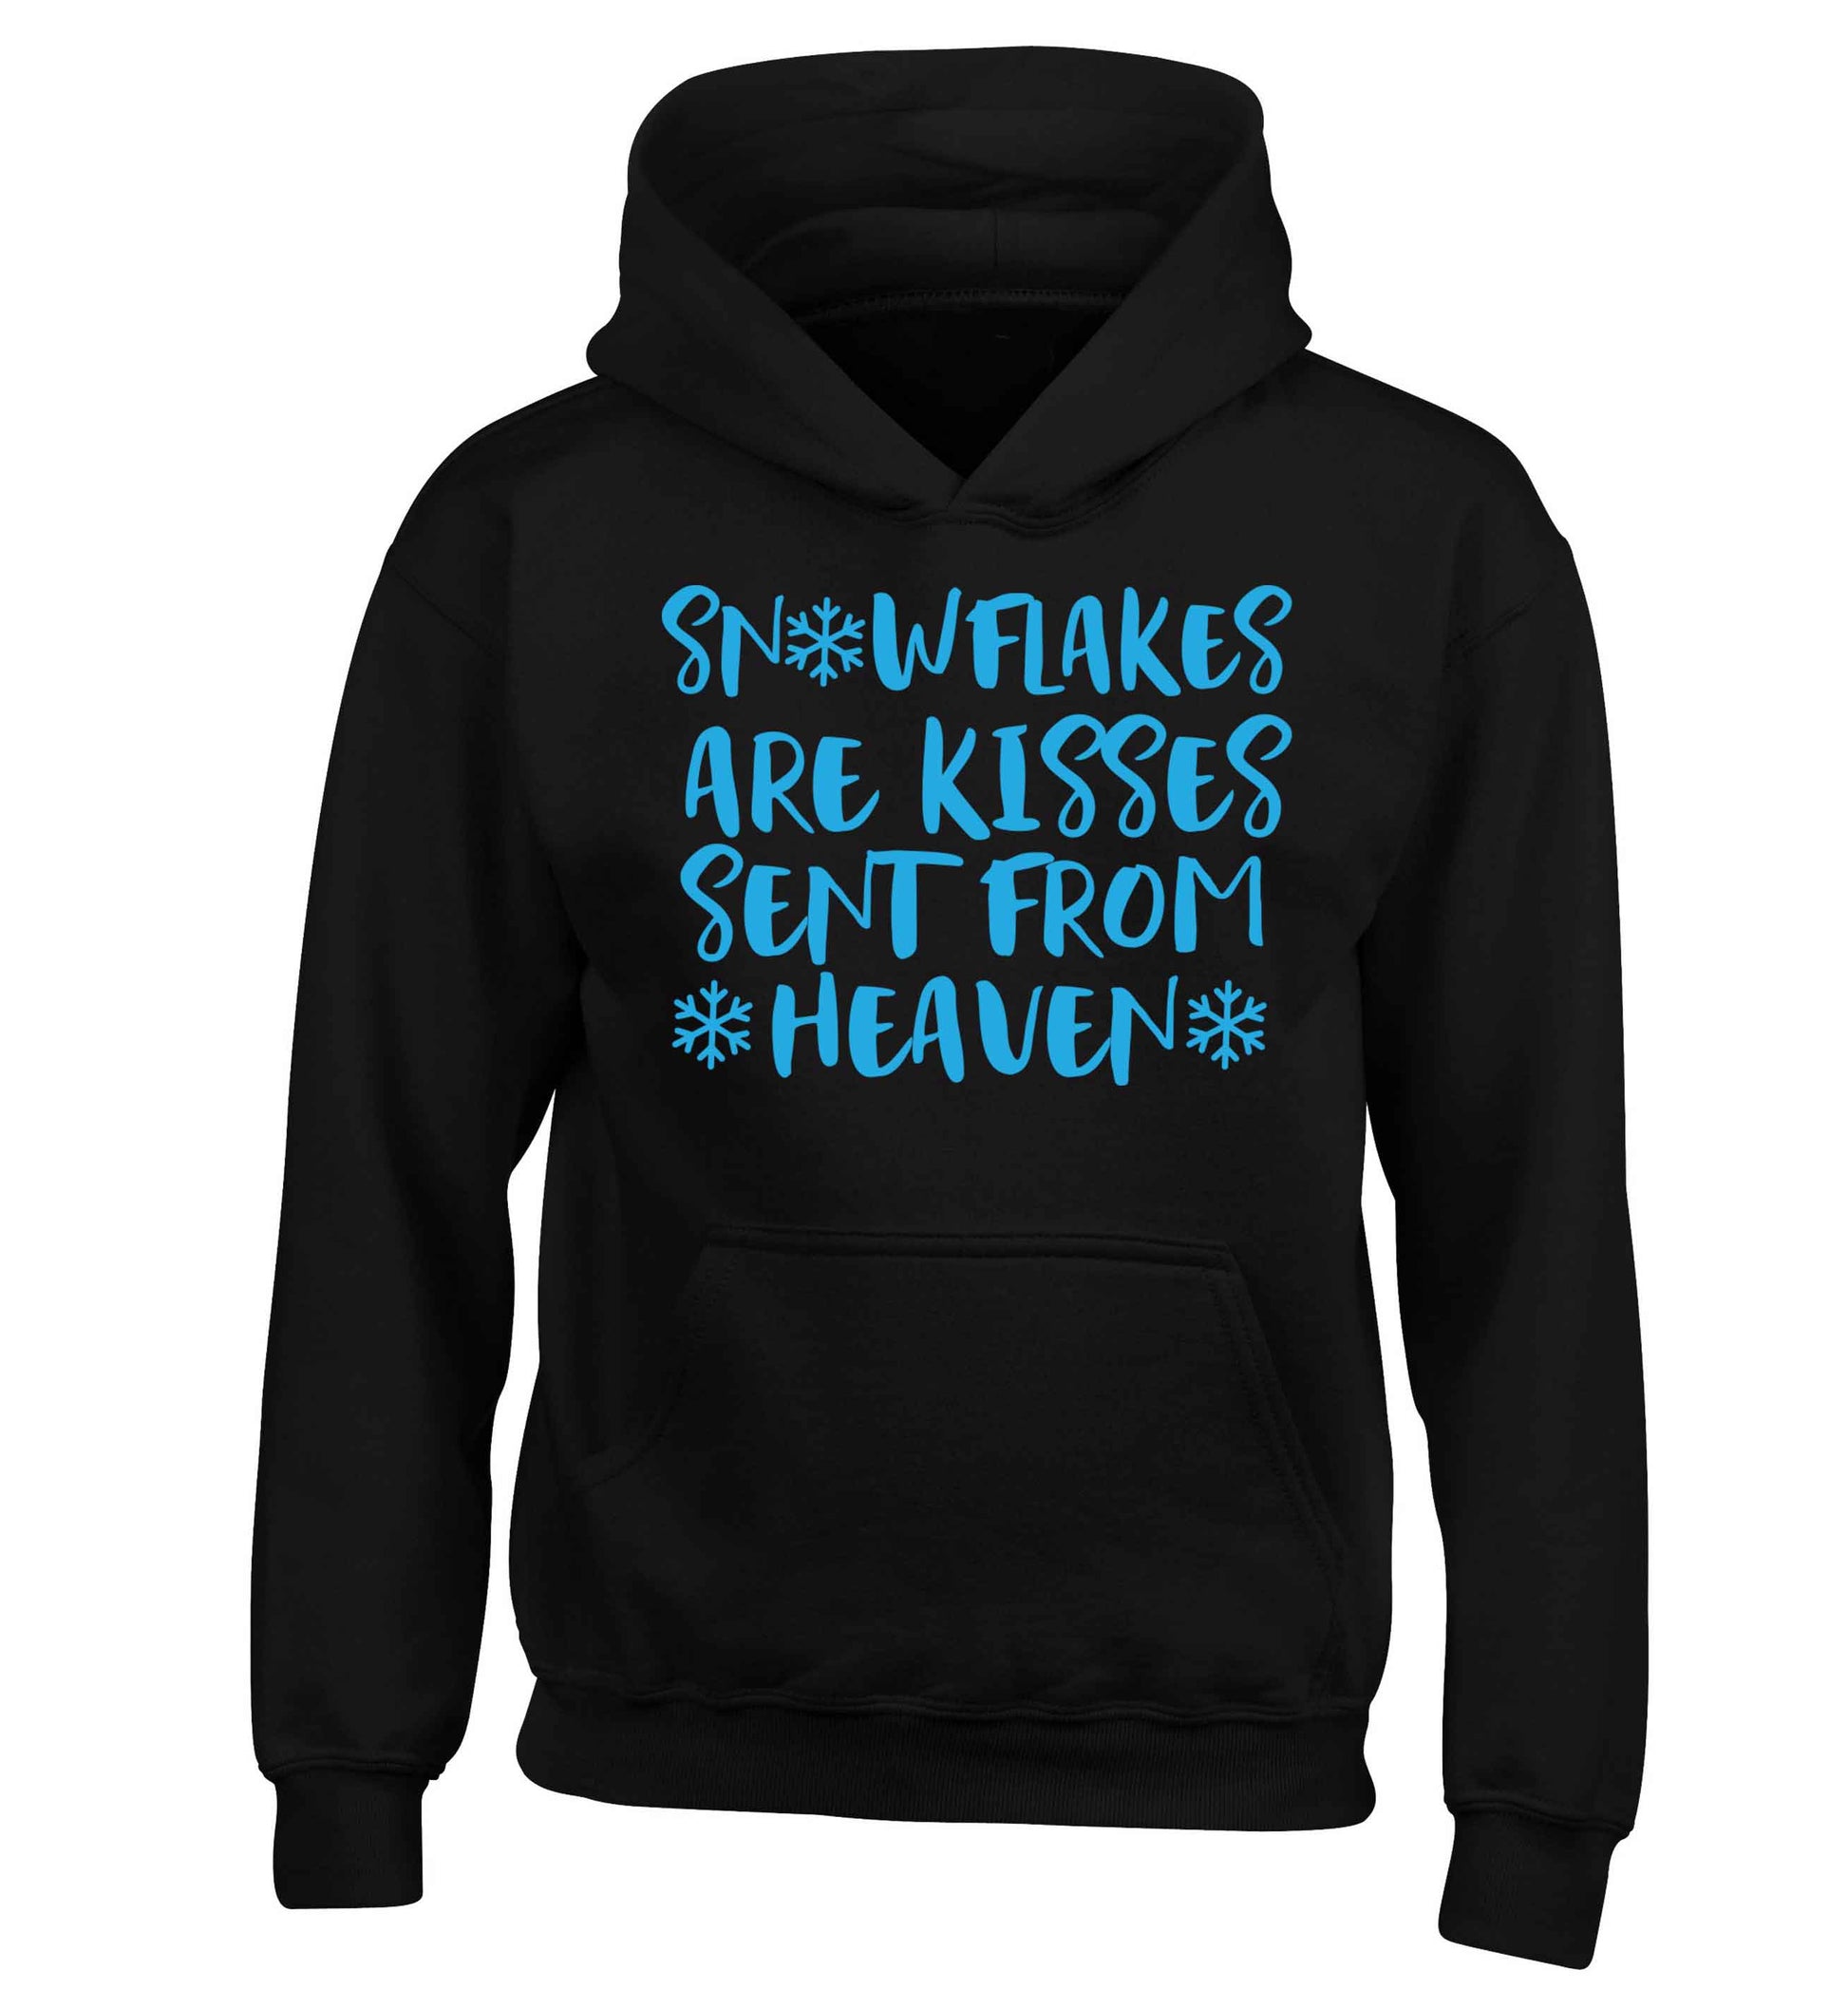 Snowflakes are kisses sent from heaven children's black hoodie 12-13 Years